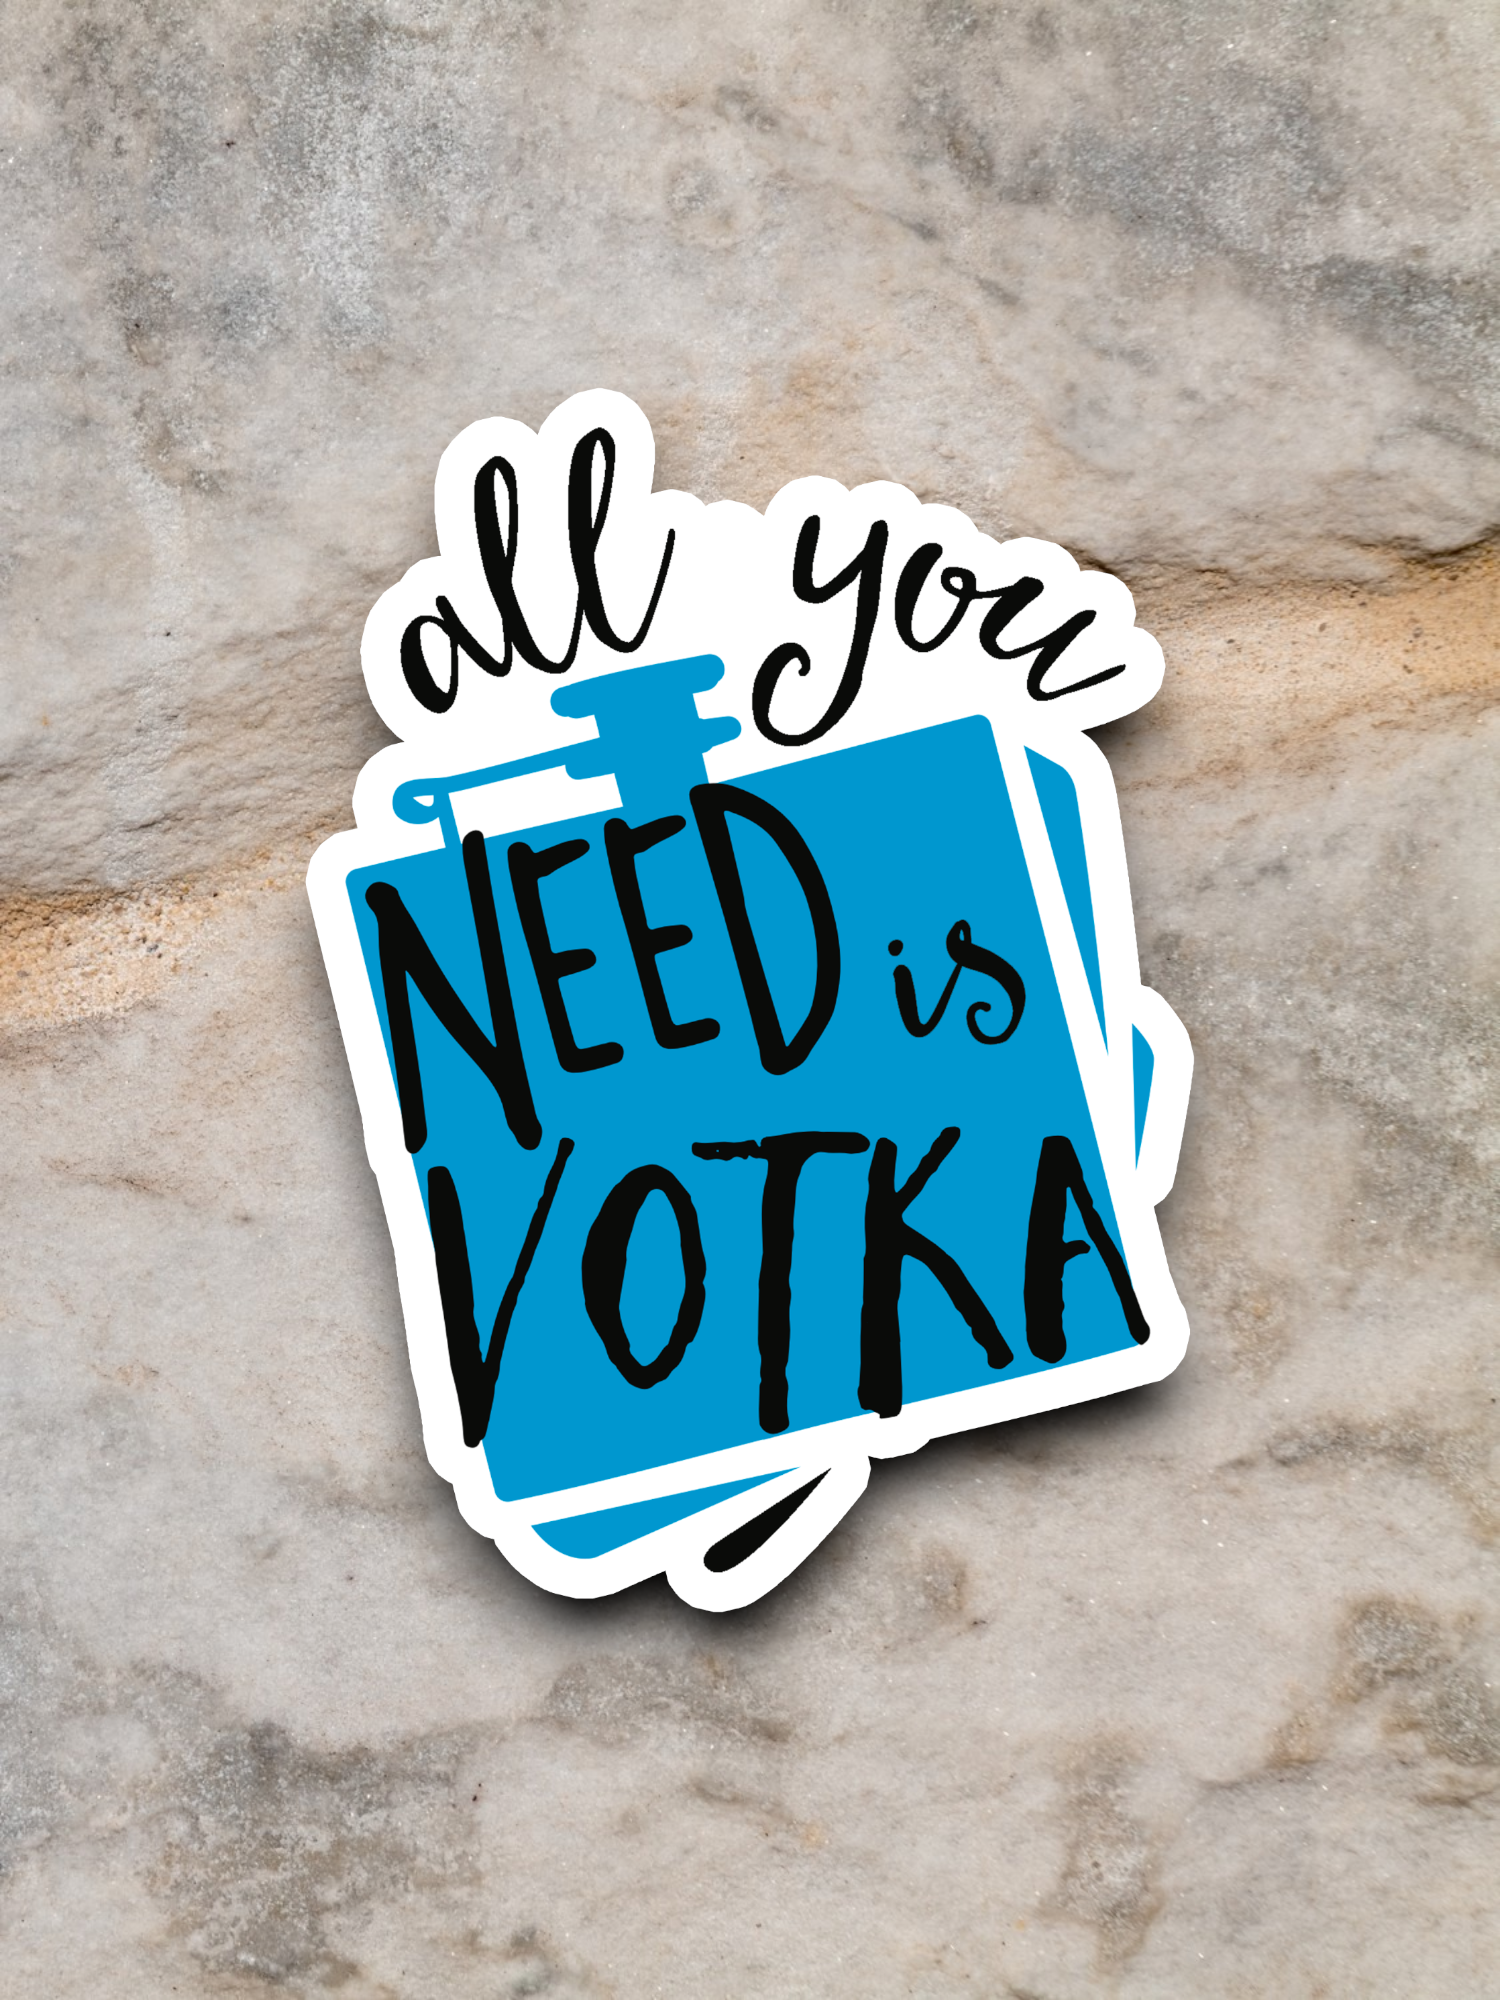 All You Need is Votka Sticker